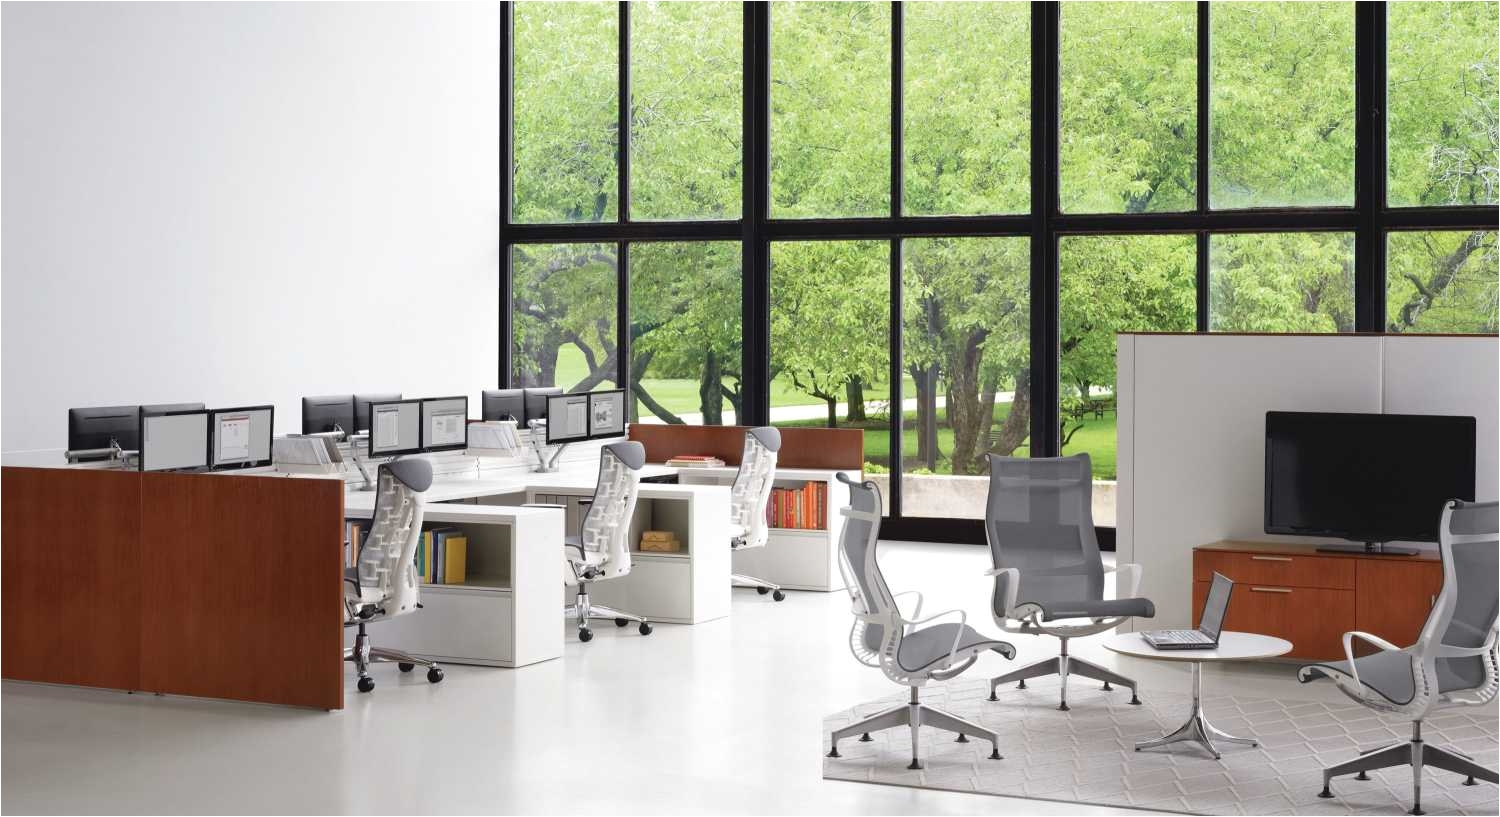 the ethospace office furniture system lets you define and redefine your workplace so it can better